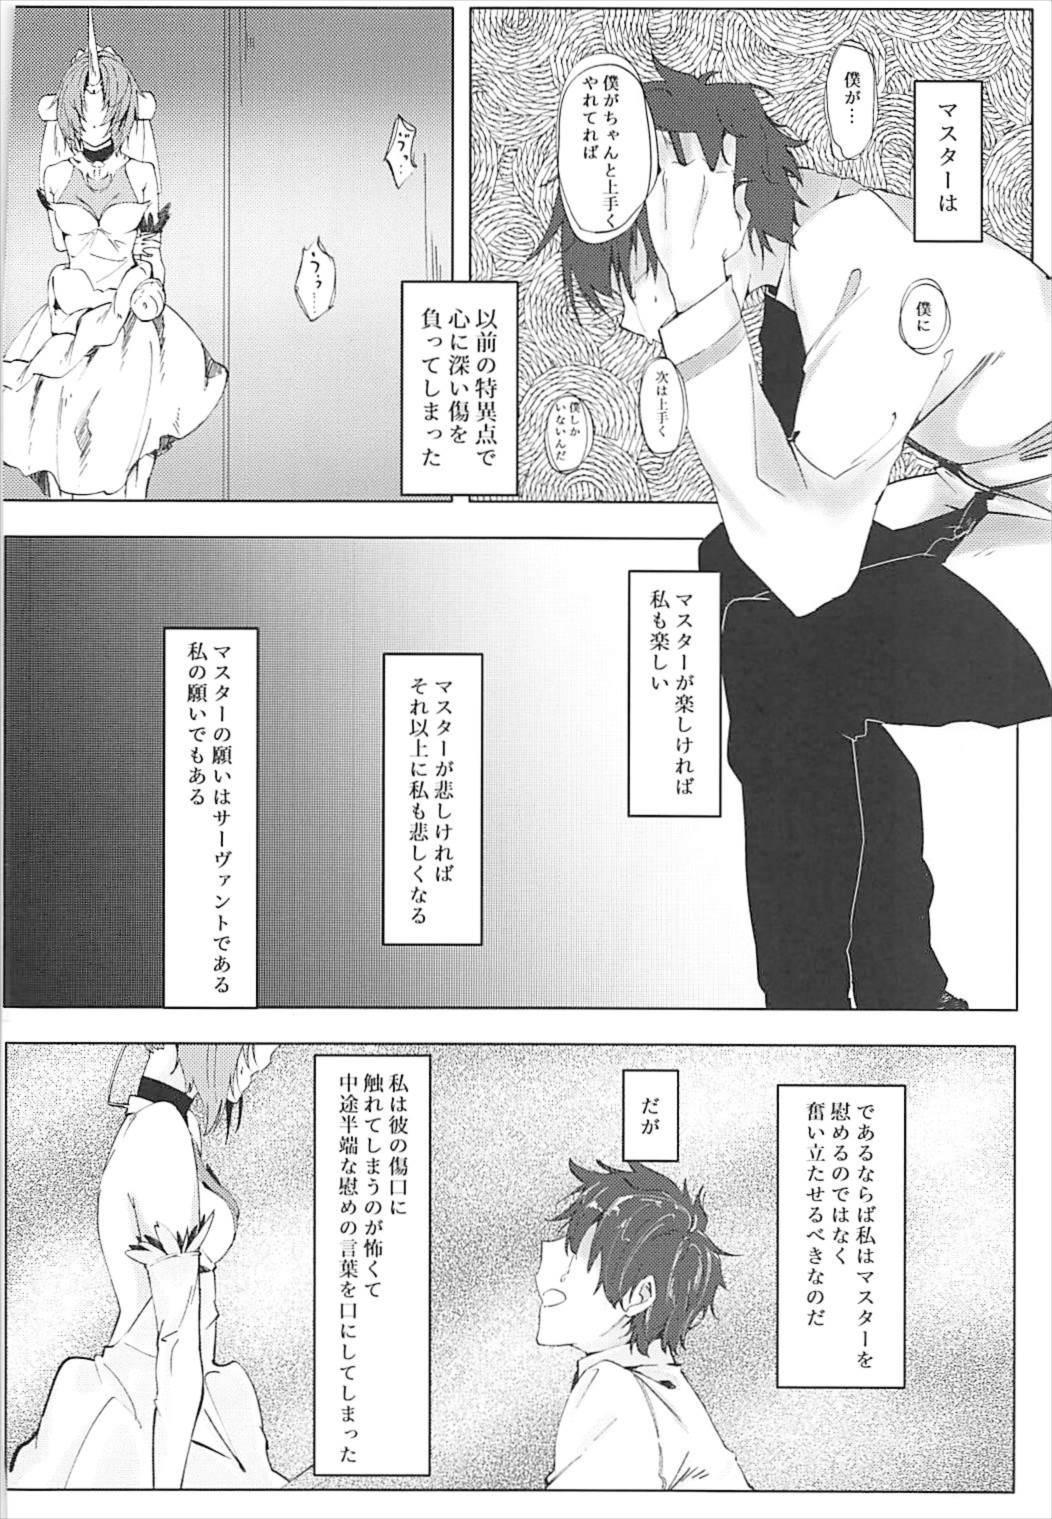 Japanese alones - Fate grand order Fuck - Page 8